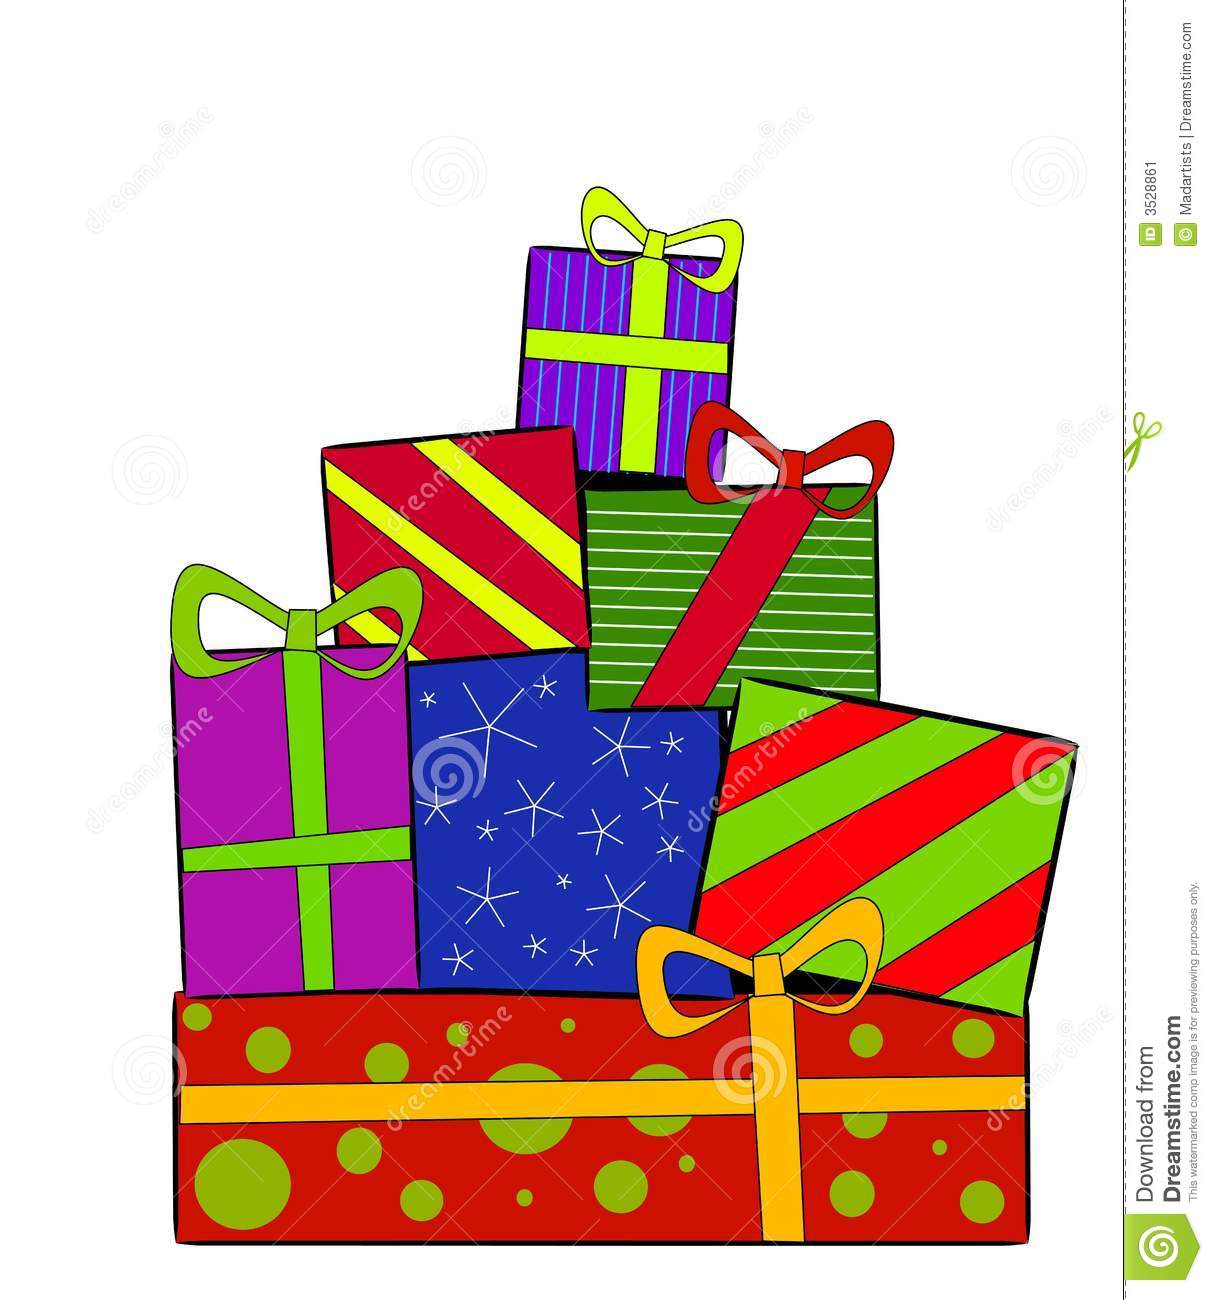 Clip Art Illustration Of A Pile Of Christmas Gifts And Presents